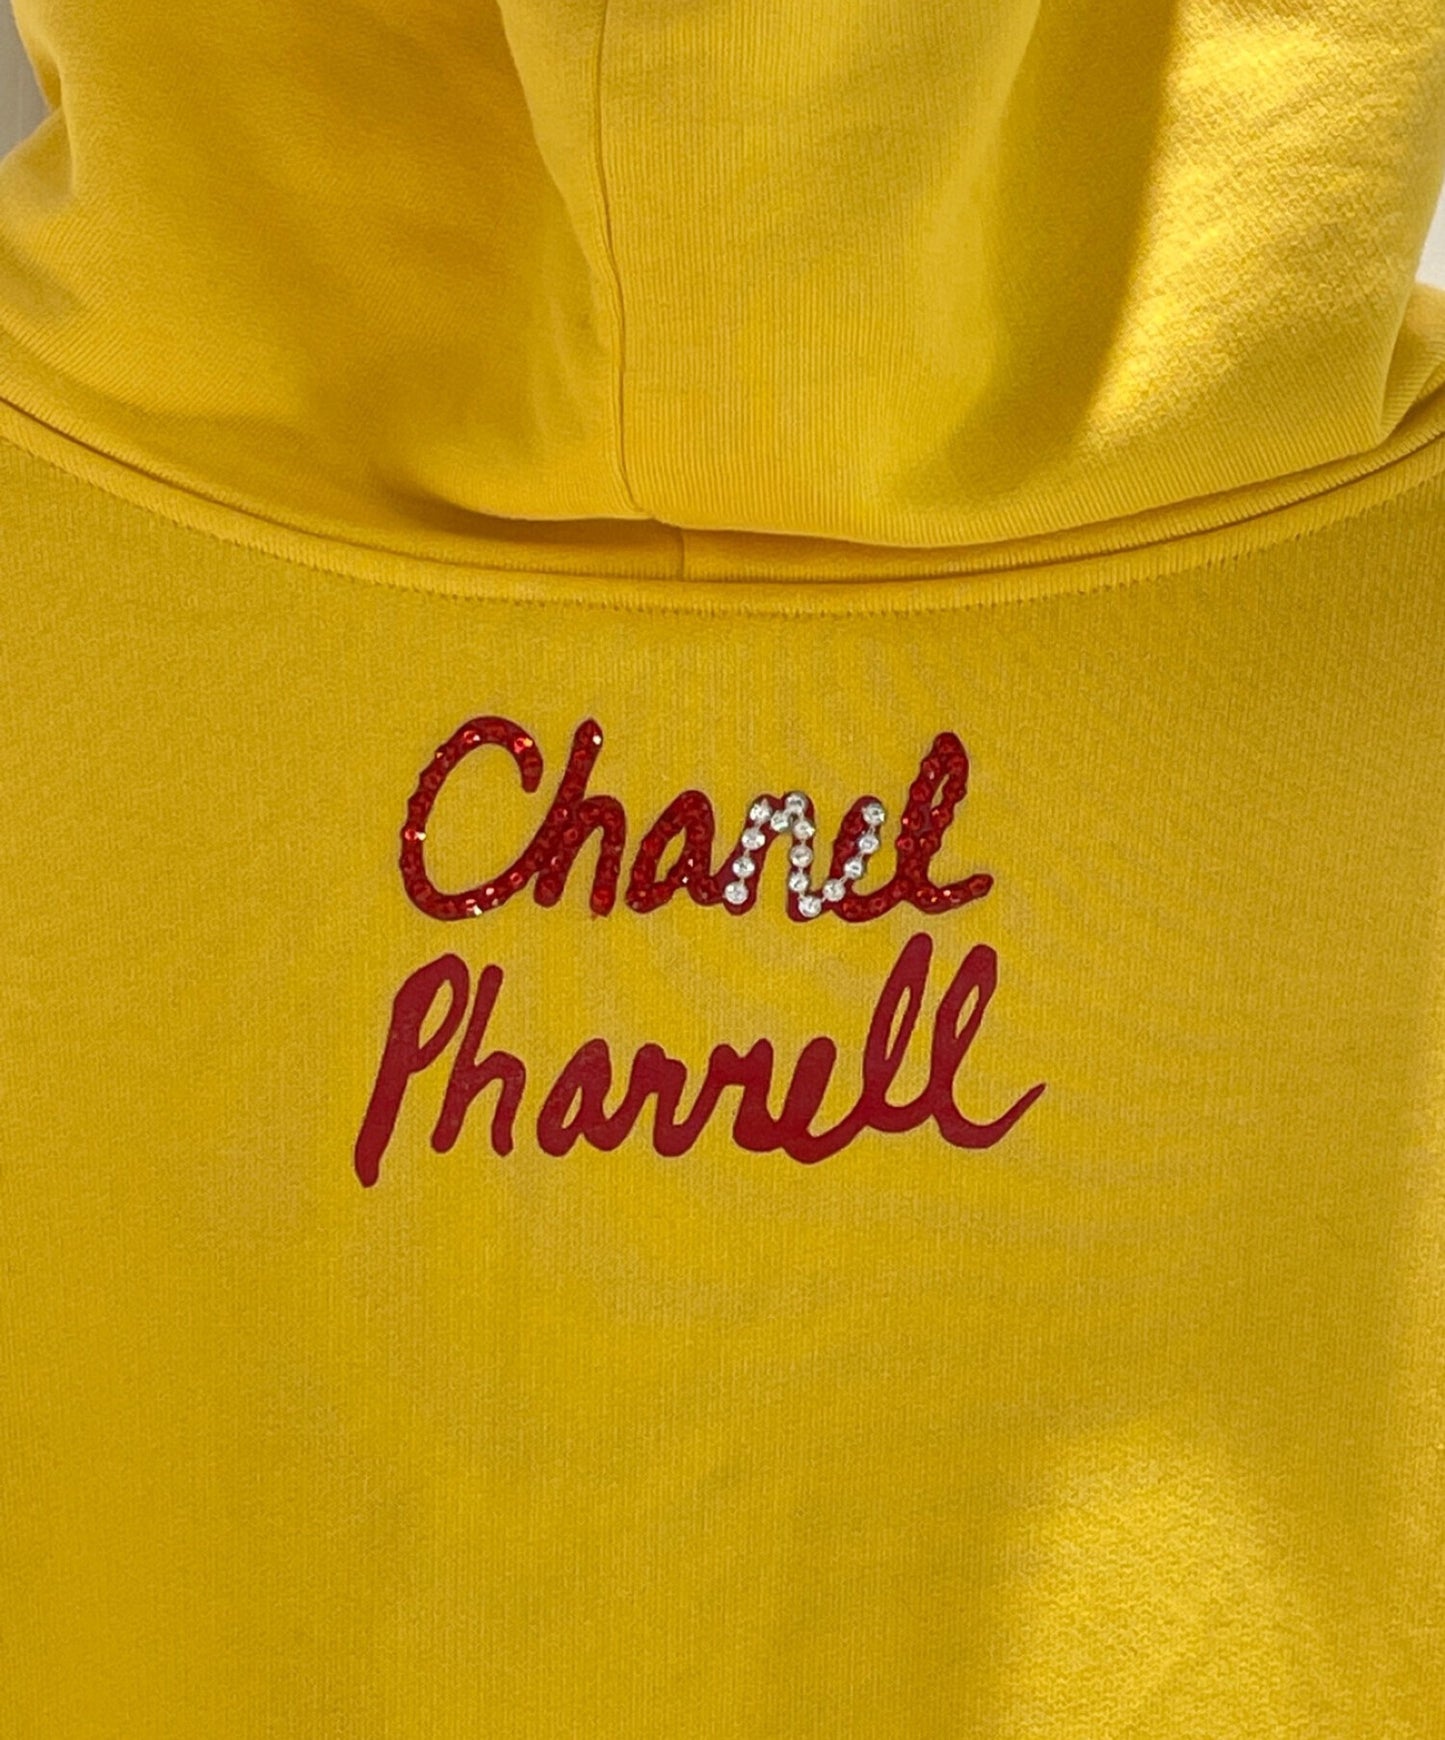 Chanel Pharrell Williams Hoodie Limited Collaboration